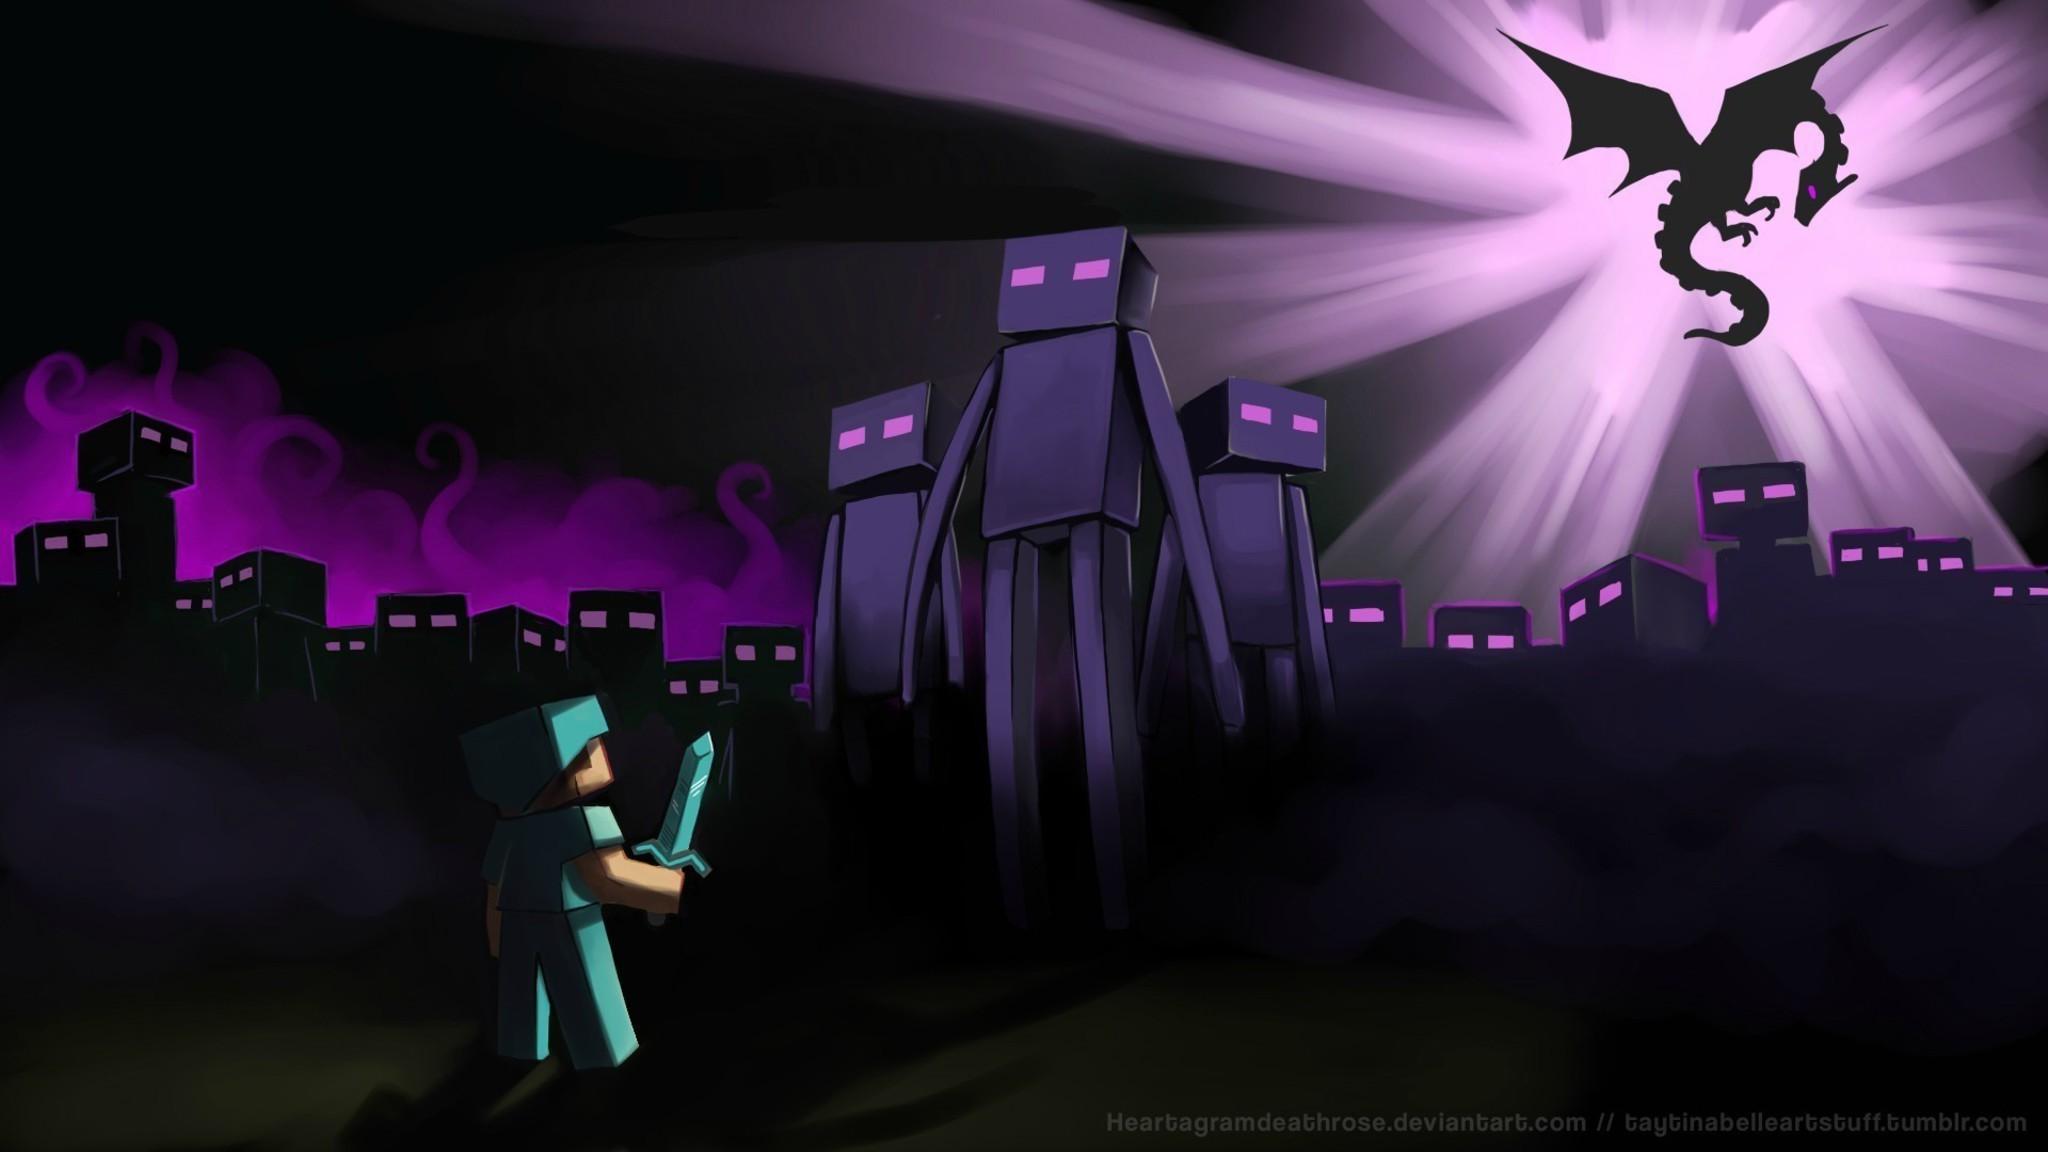 Download Heroic Battle with the Ender Dragon Wallpaper